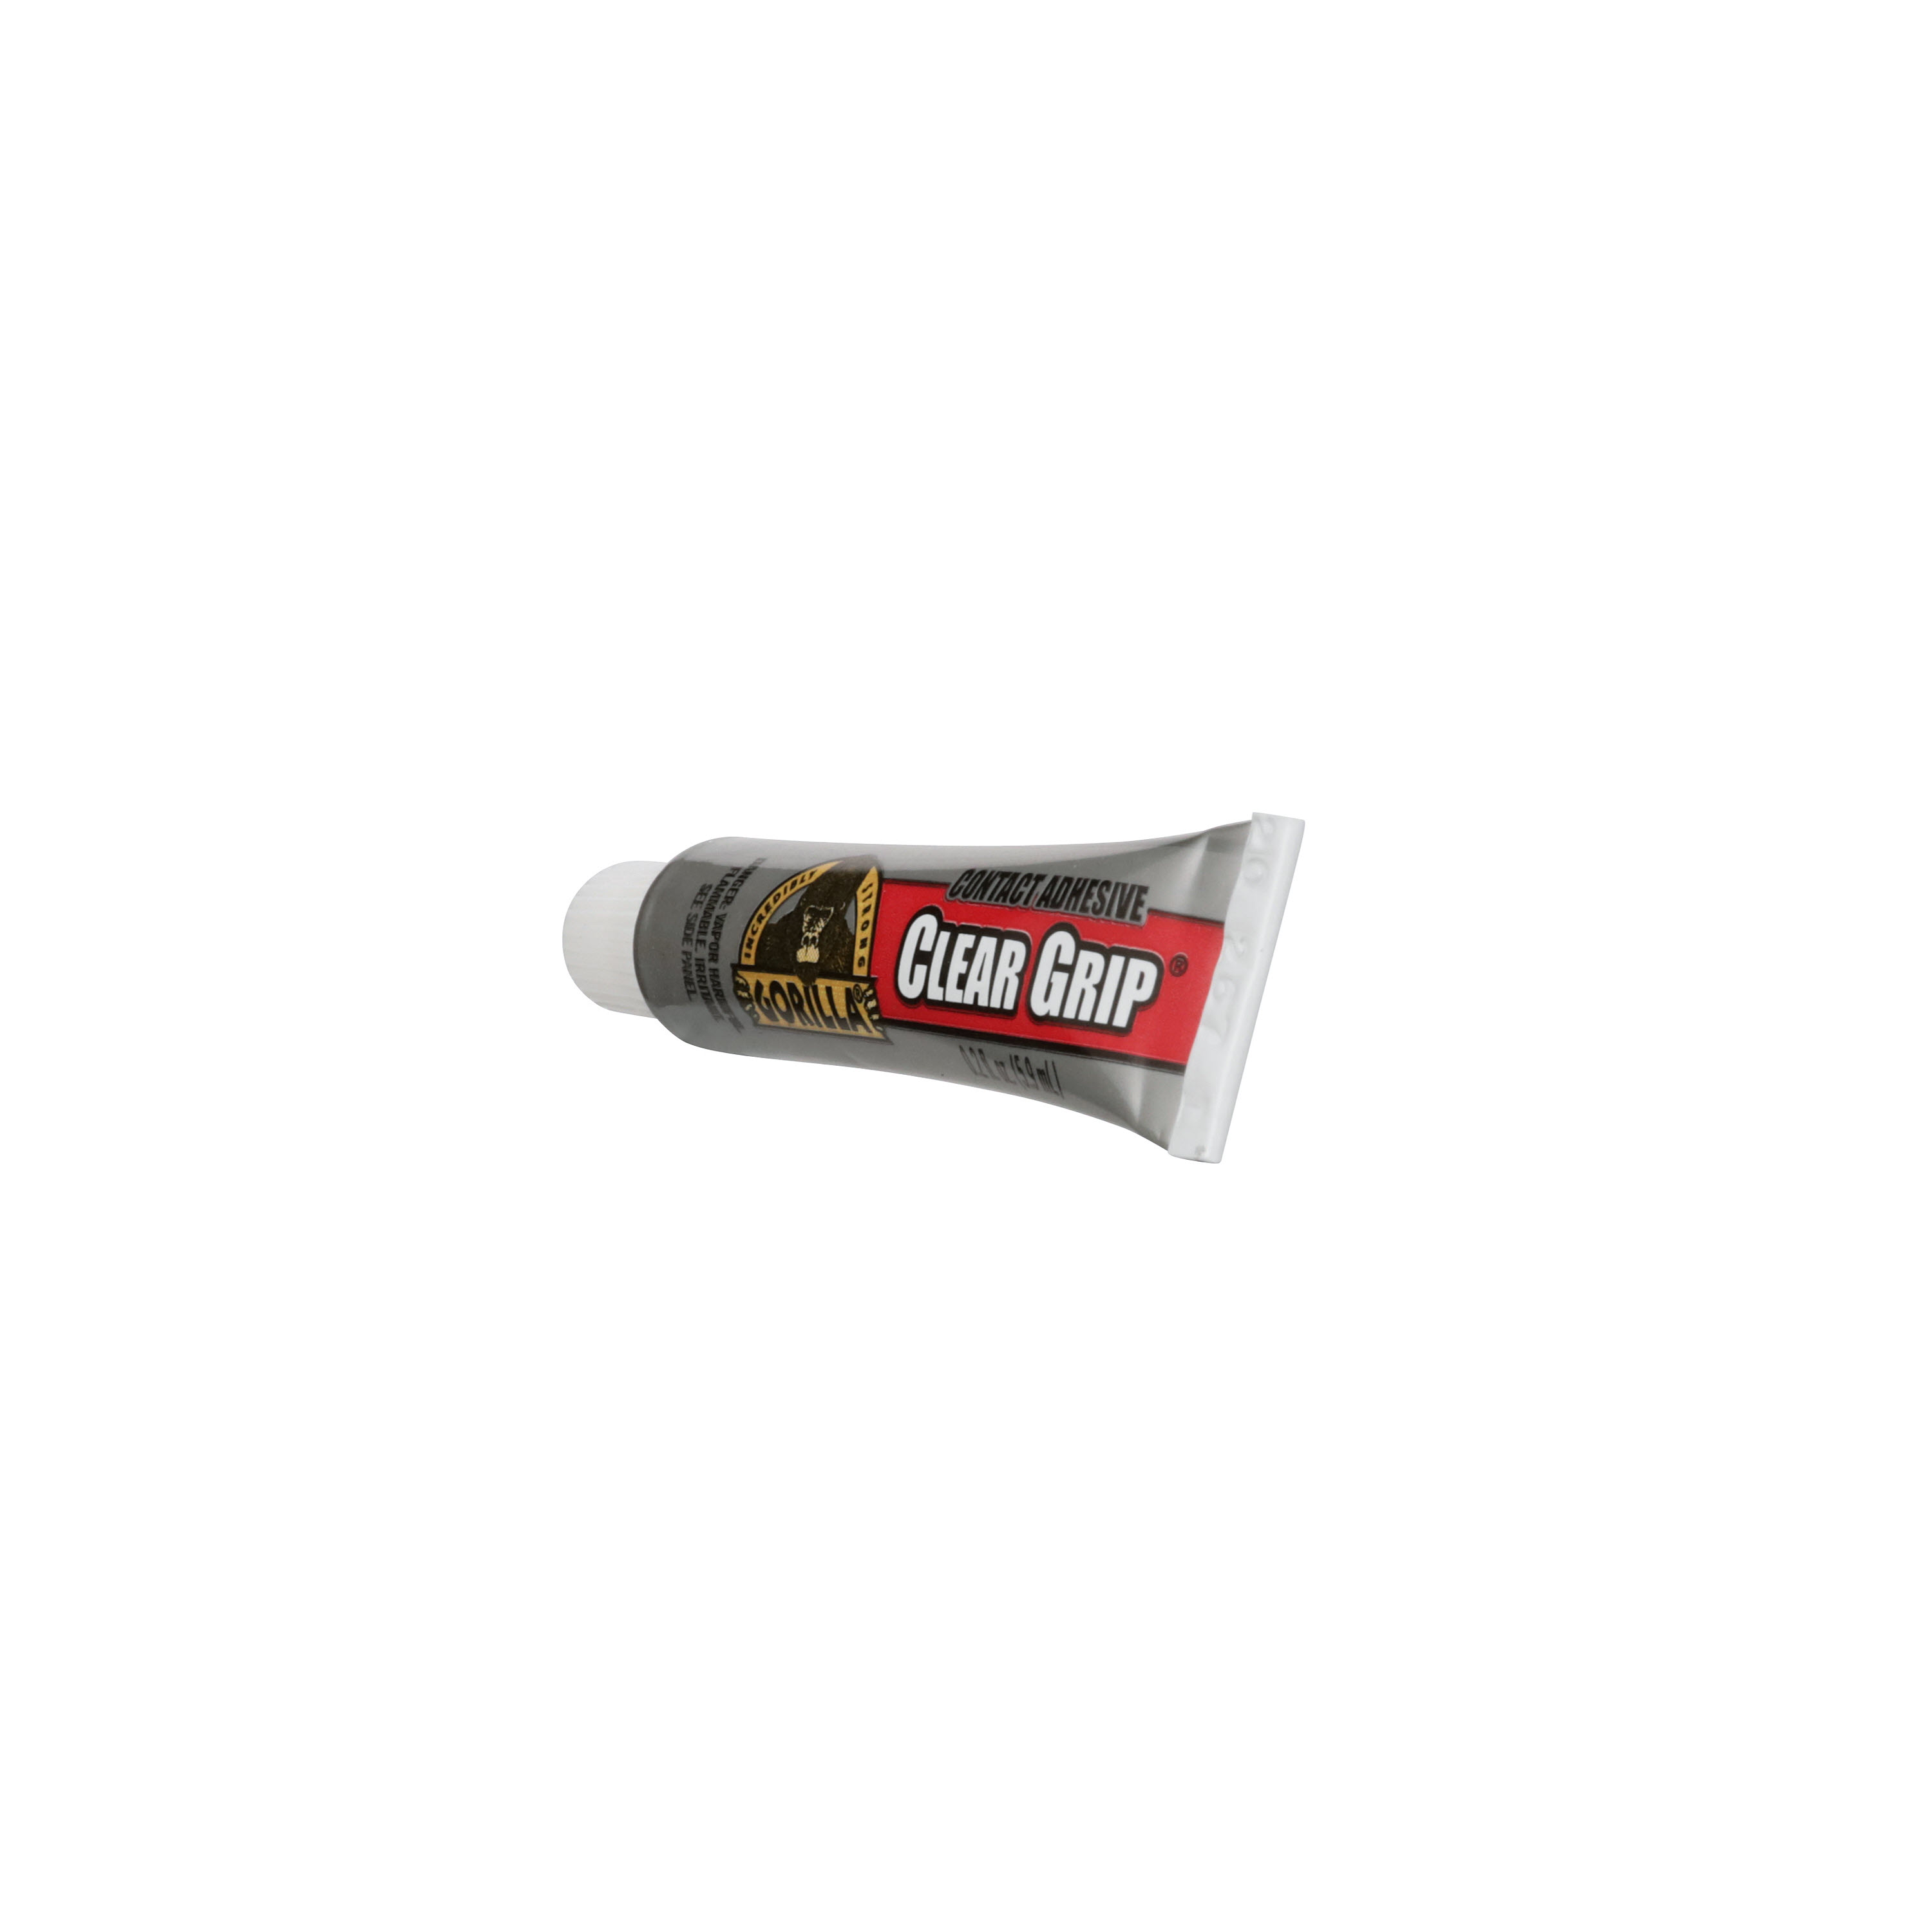 Gorilla® Clear Grip™ Contact Adhesive Minis